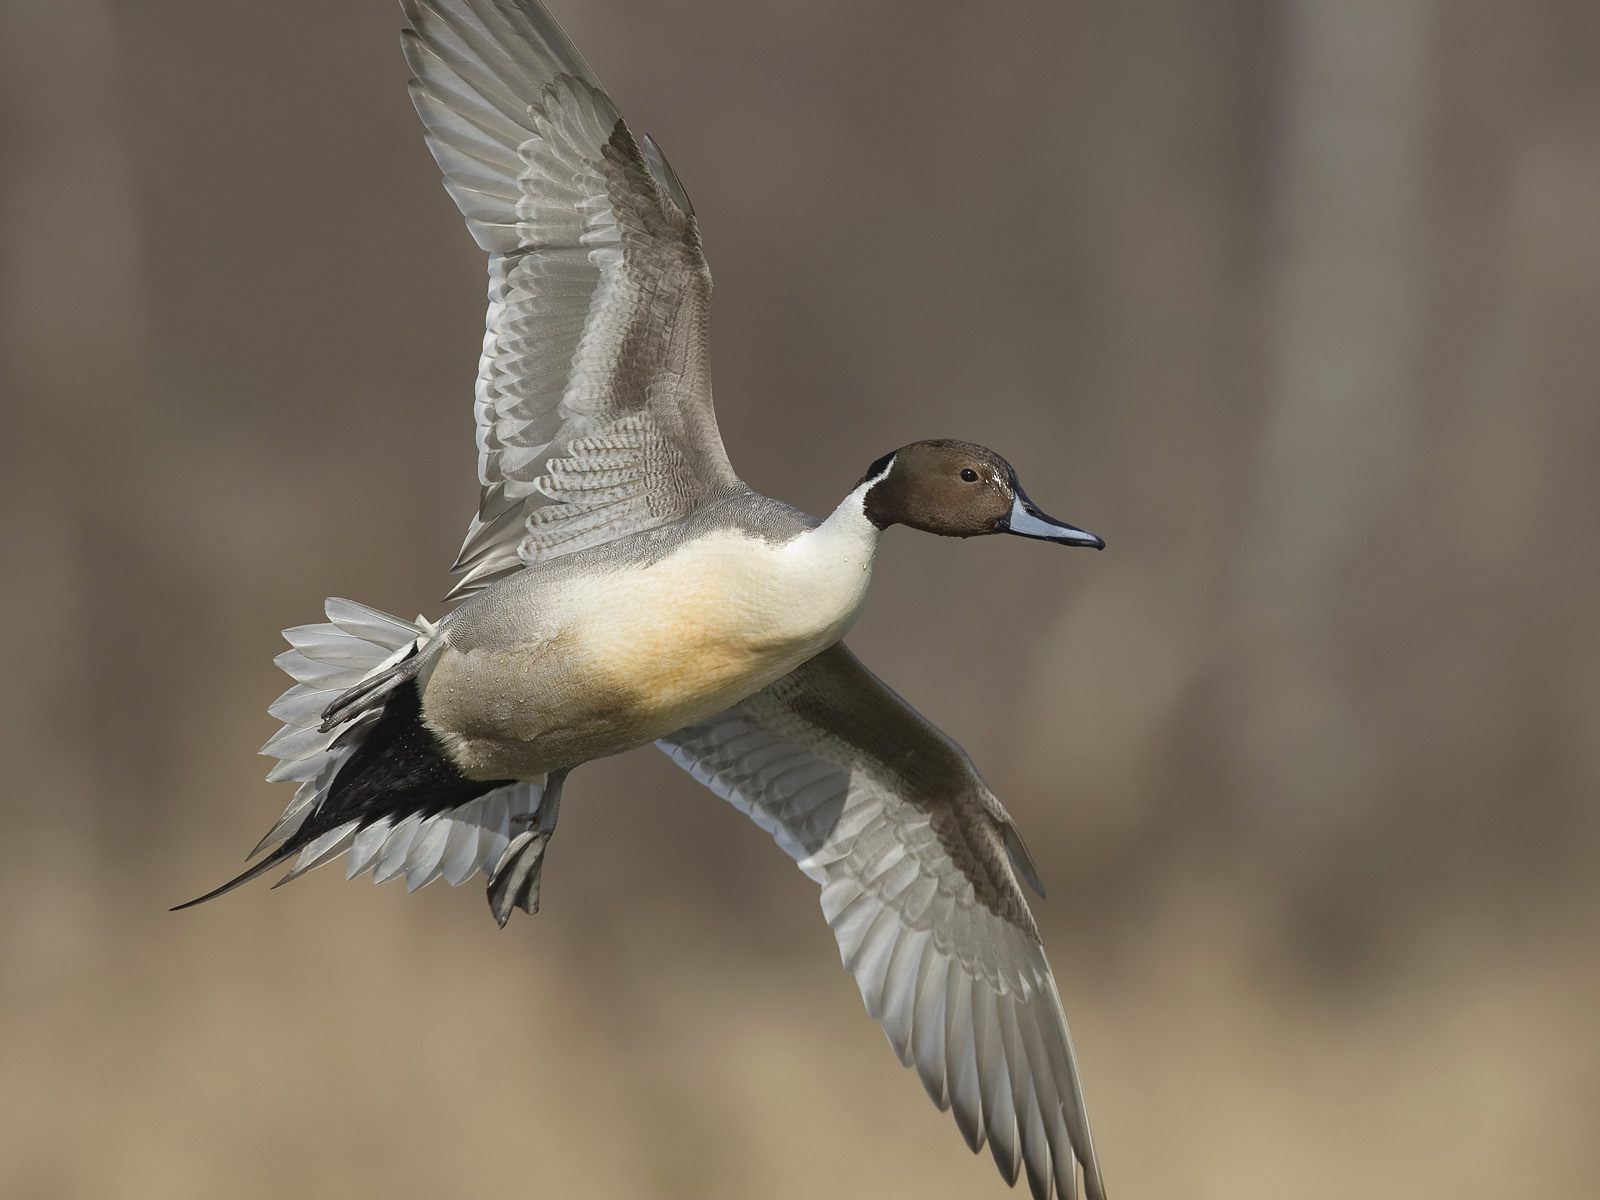 Pintail Ducks in Canada